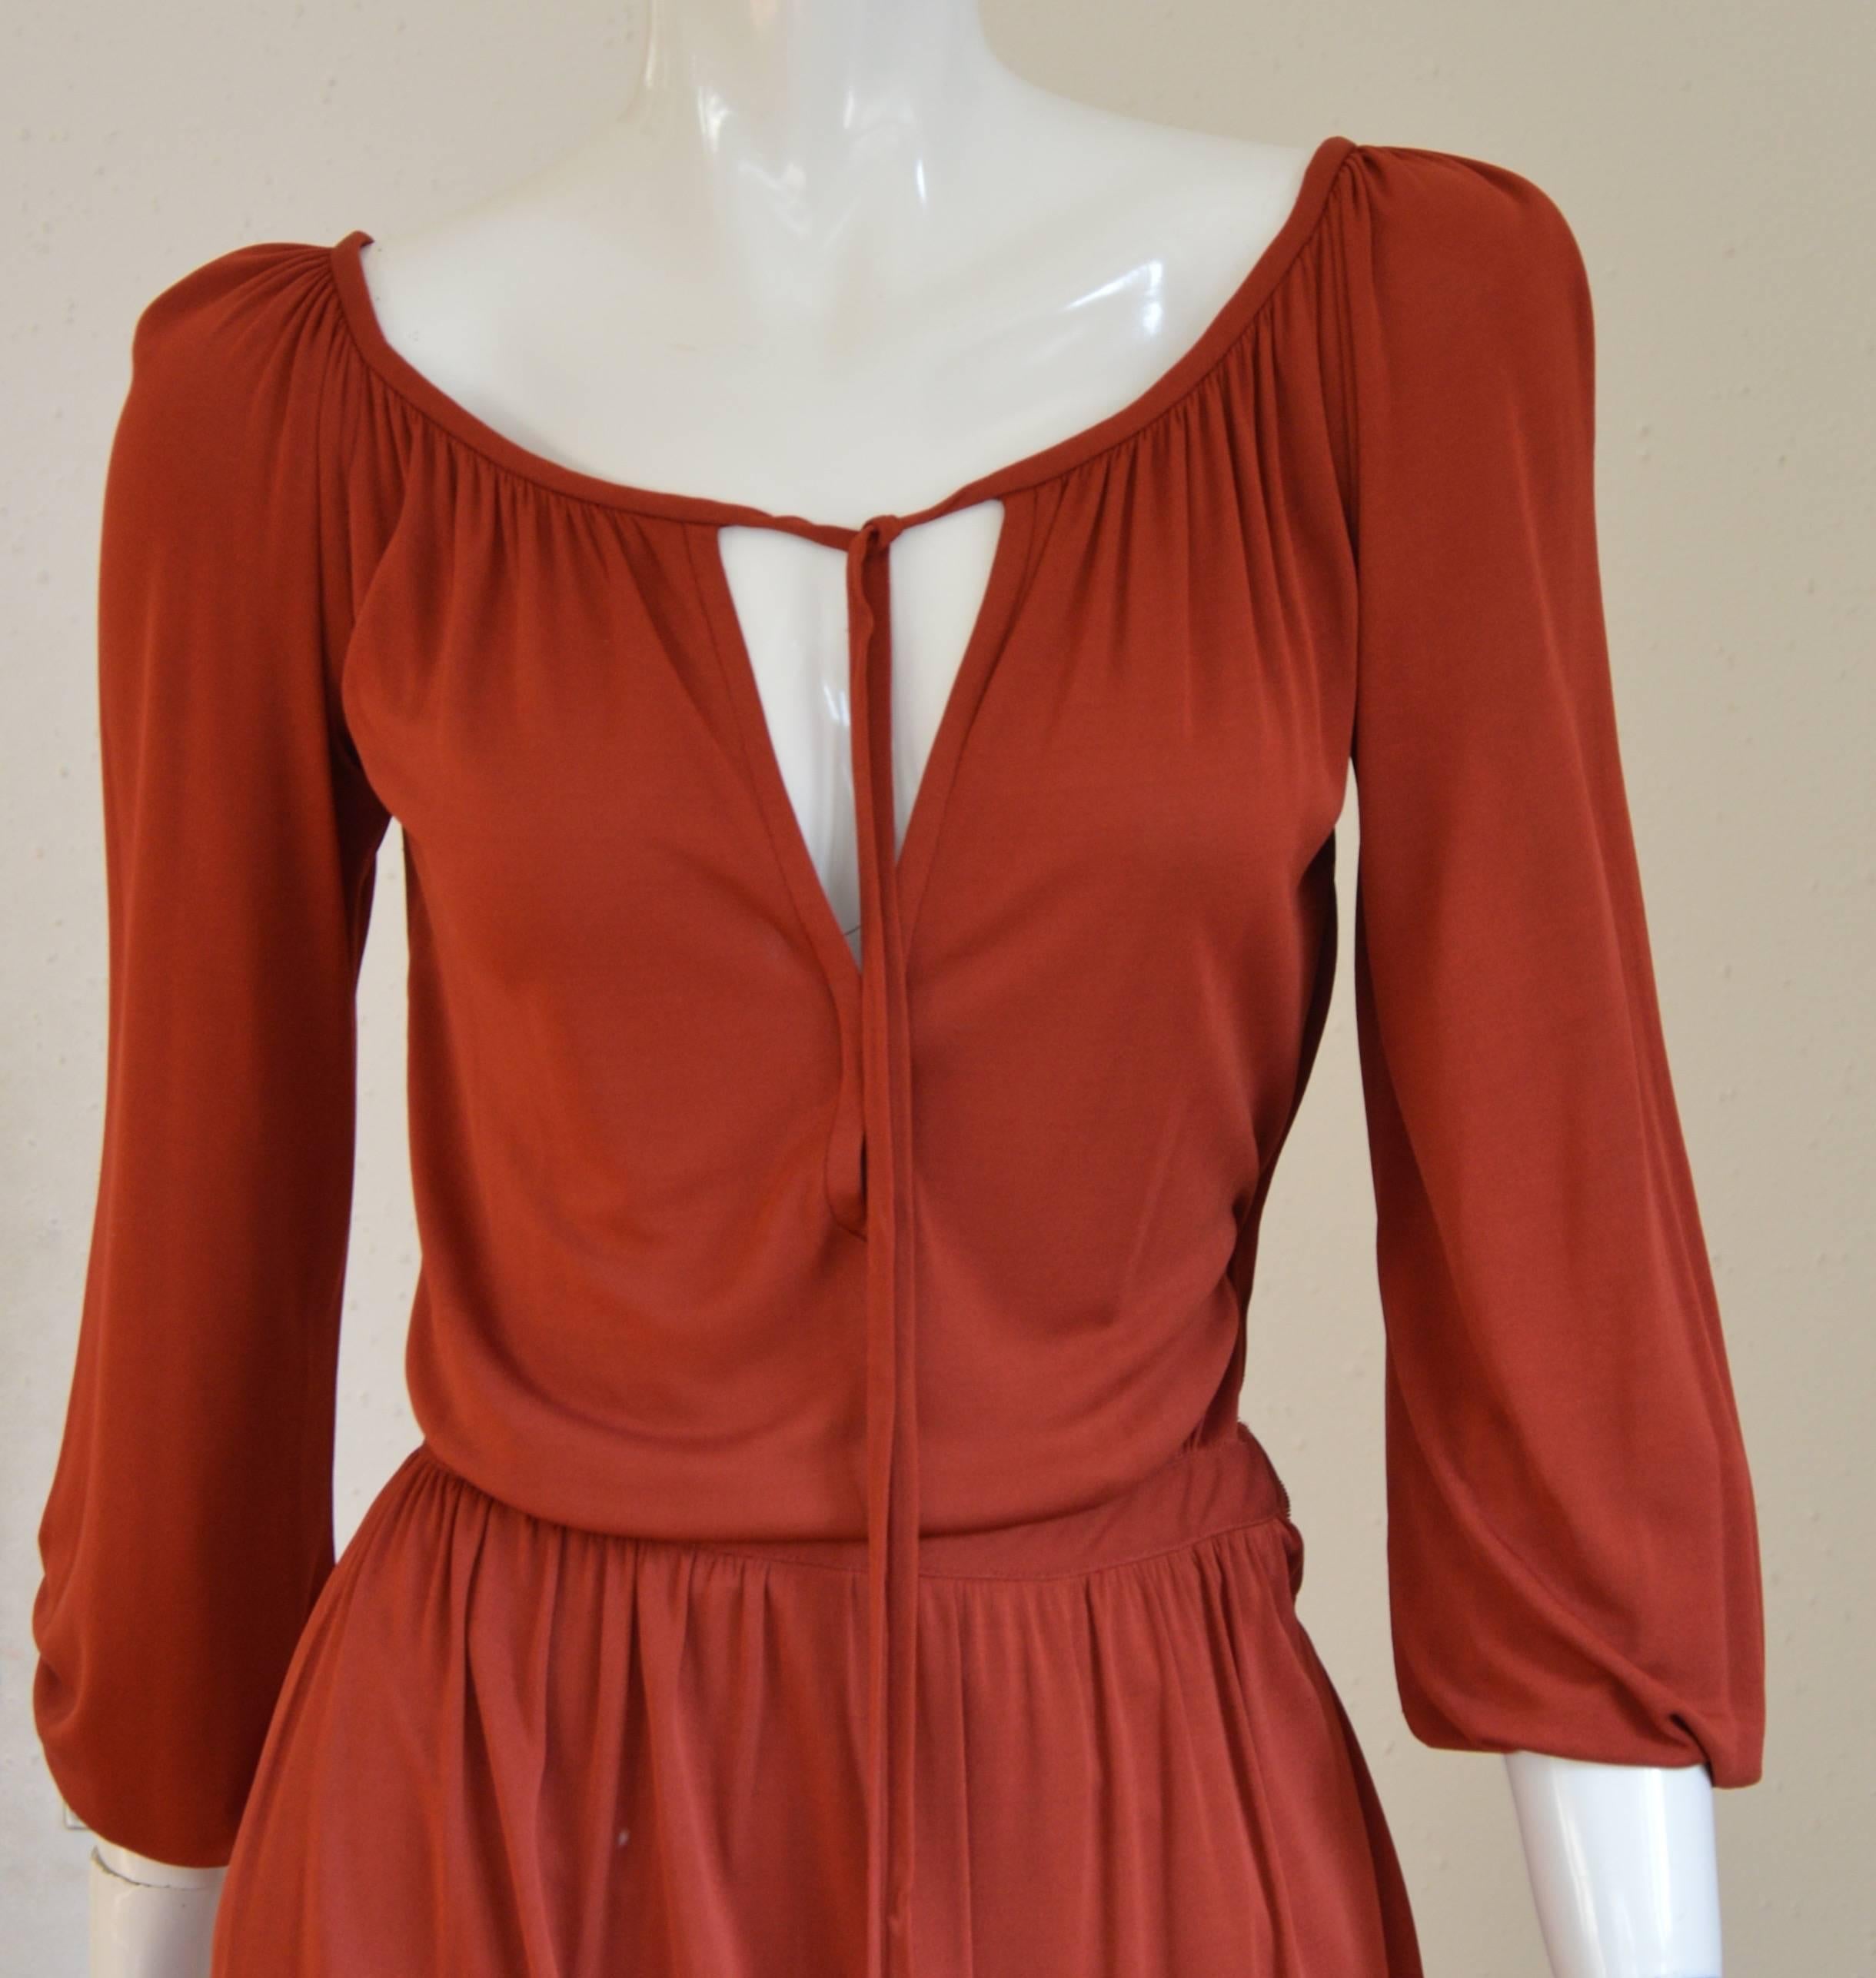 Excellent condition for this superb YSL Rive Gauche lovely dress. The rusty silk jersey is fabulous by itself then the cut is sexy and simple. 2 sides pocket, 1 closure zip on one side.
Measurements :
Bust / 84 cm
Waist / 70 cm
Hips / 92 cm
TL